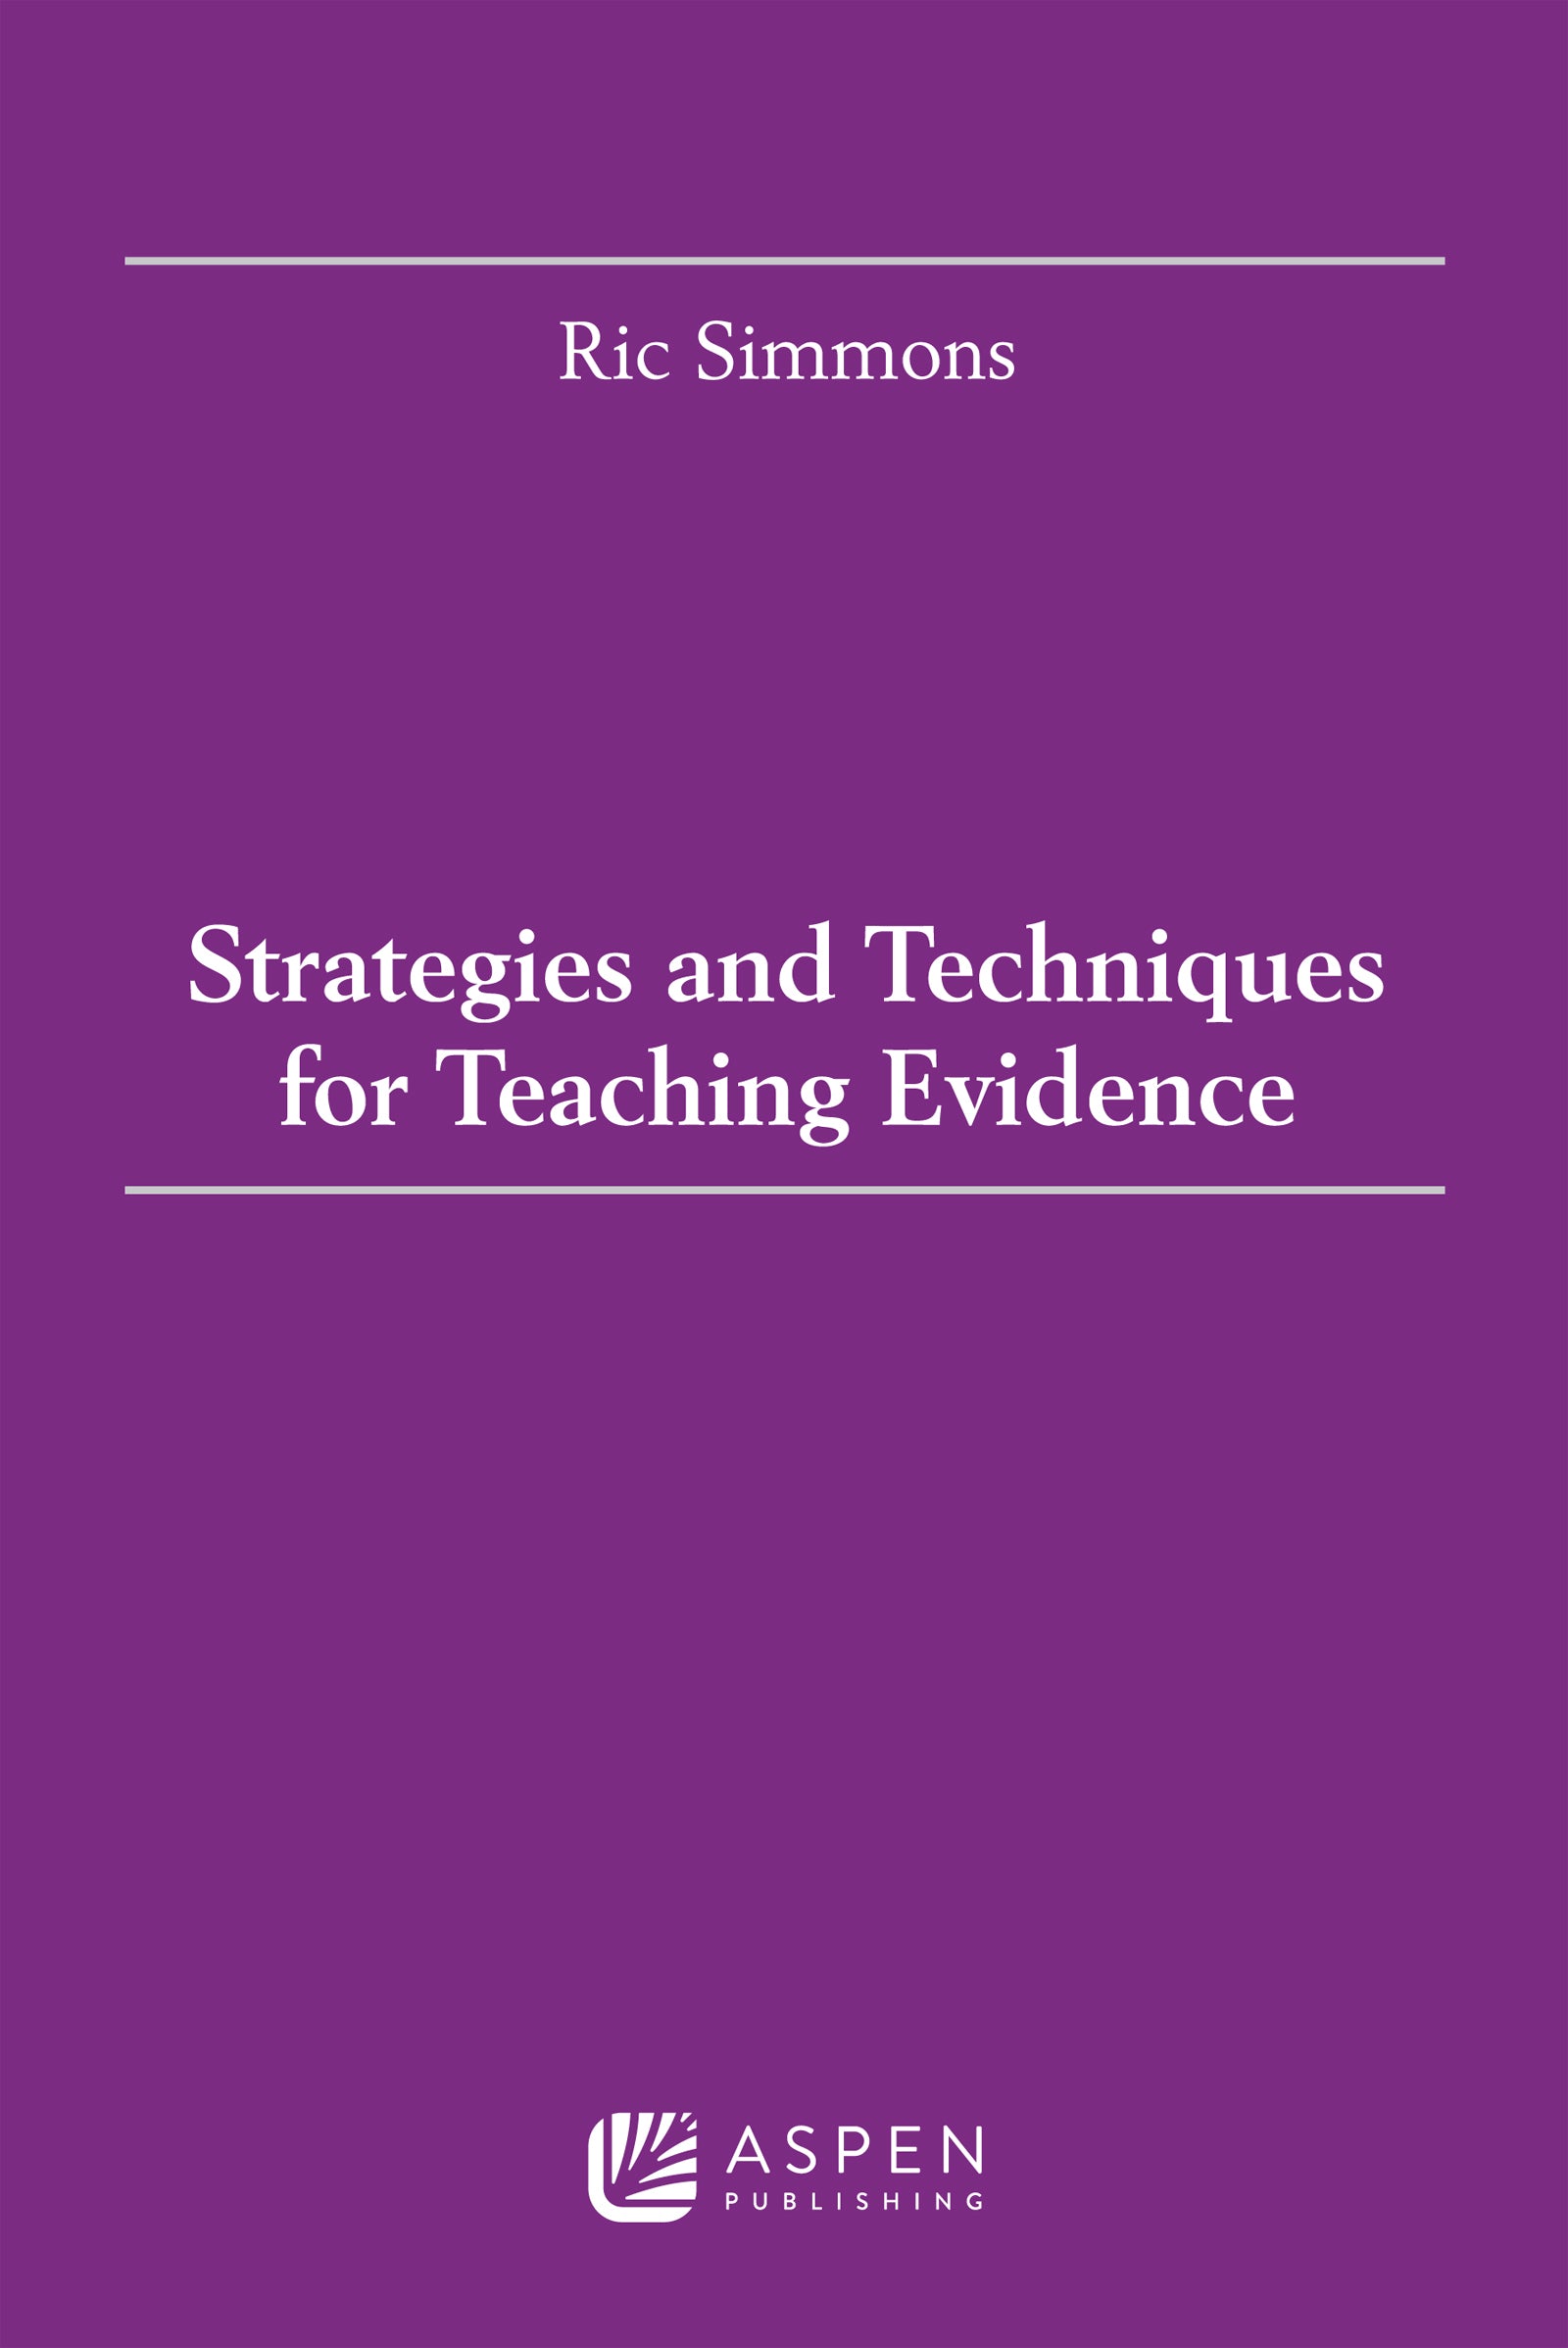 Strategies and Techniques for Teaching Evidence